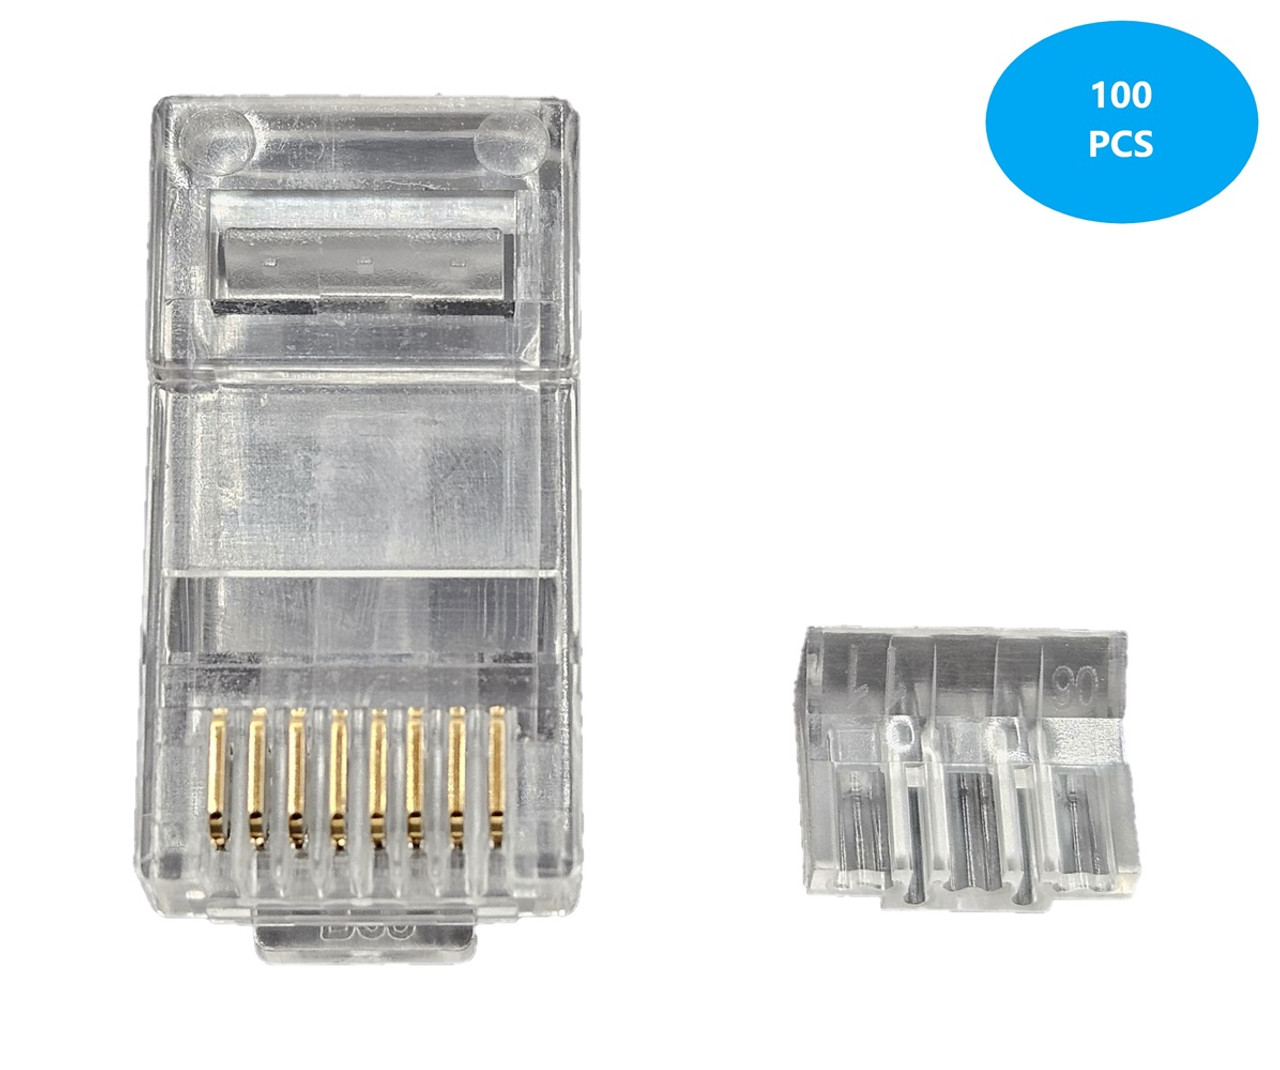 Cat6/6A RJ45 Connectors & Boots For Slim Stranded (28/32 AWG) Cable With Load Bar 100/100-Pack